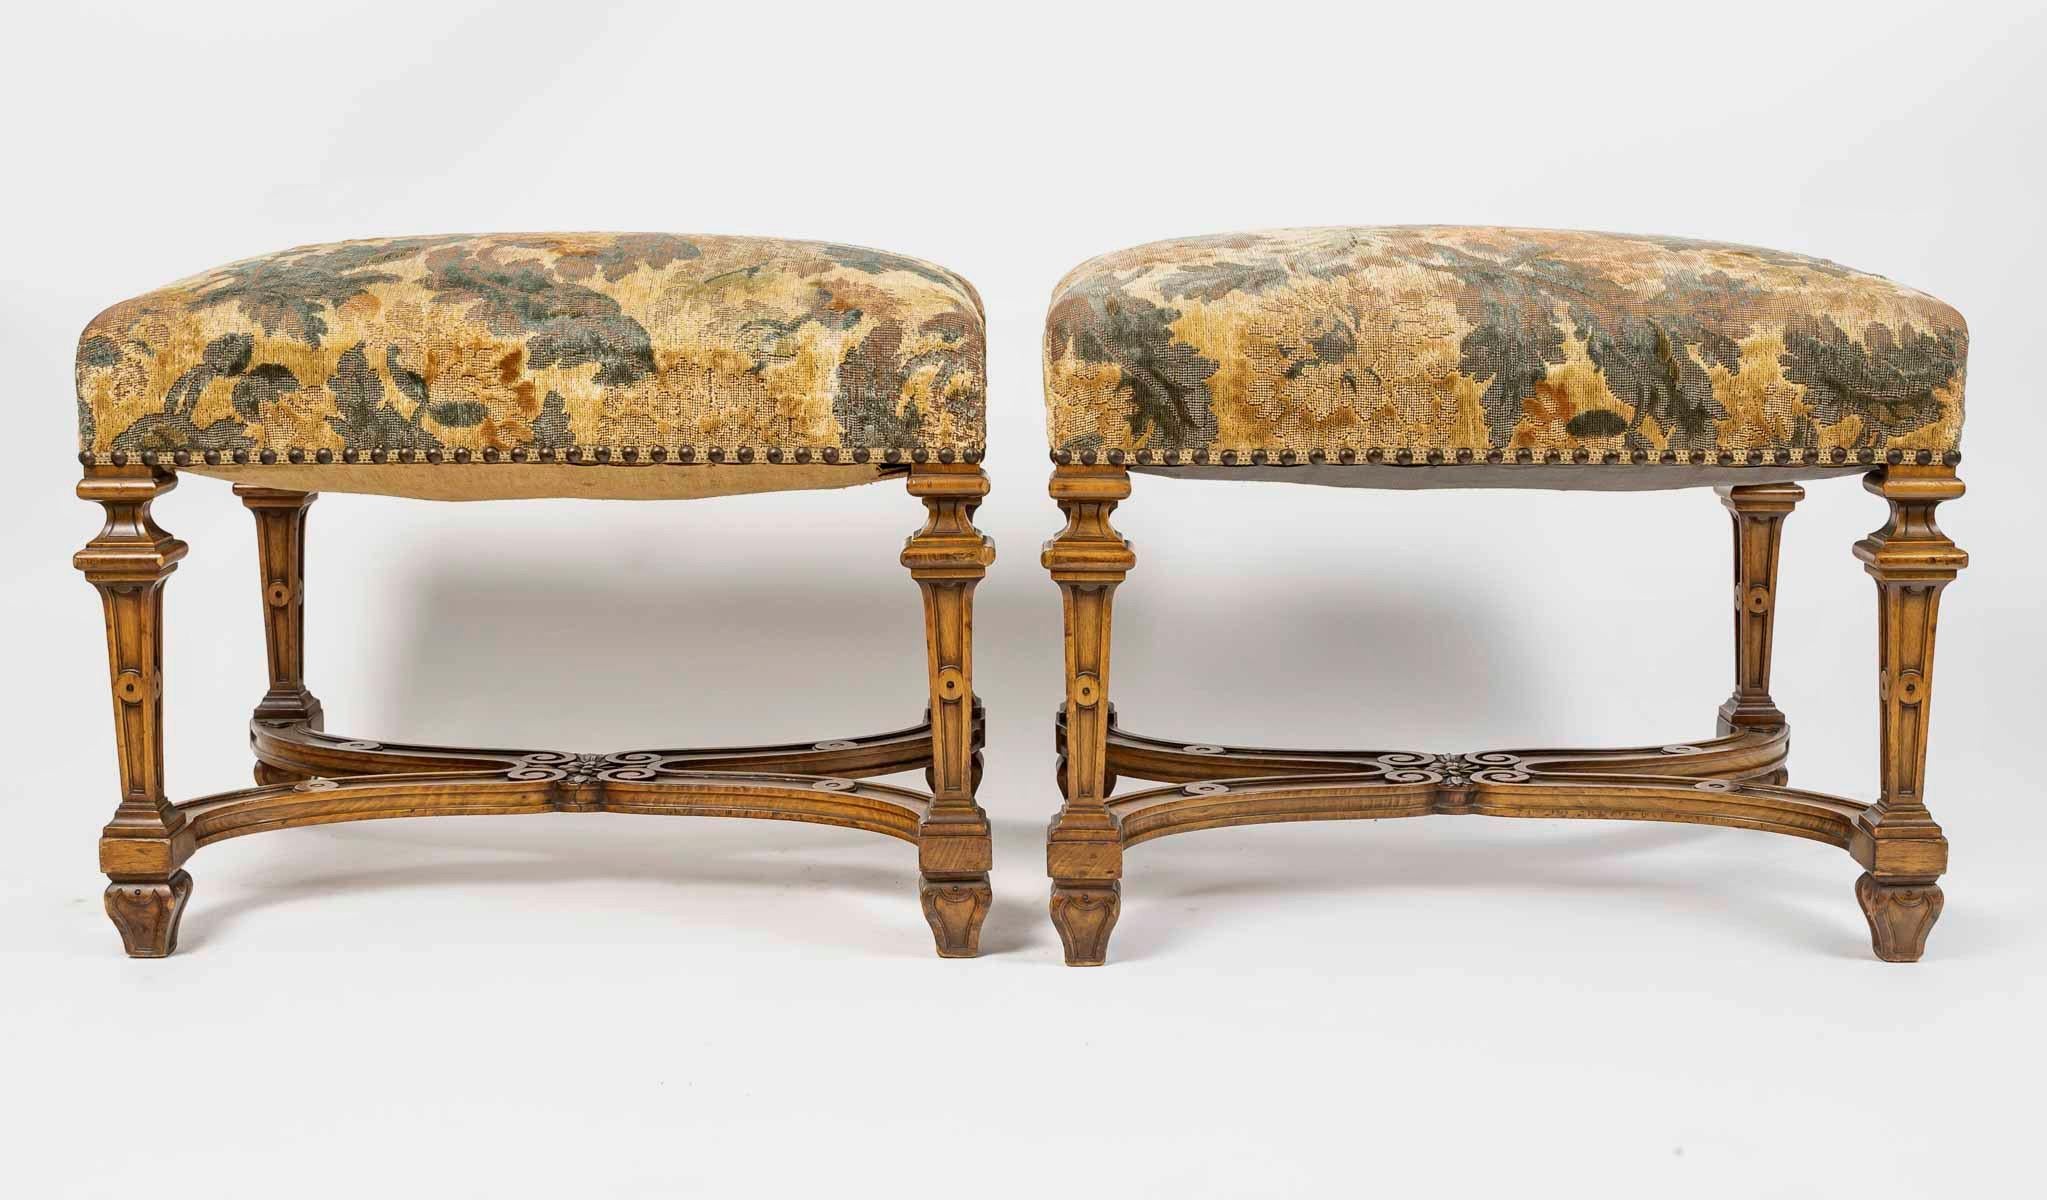 A French 19th Century Pair of Large Rectangular Stools natural and carved wood.
The 4 sheaths feet carved and linked by a stretcher. 
Louis XIV Style 
Napoléon III Period 
Circa 1880
Used Petit Point Tapestry Upholstery 

If the stool played a great